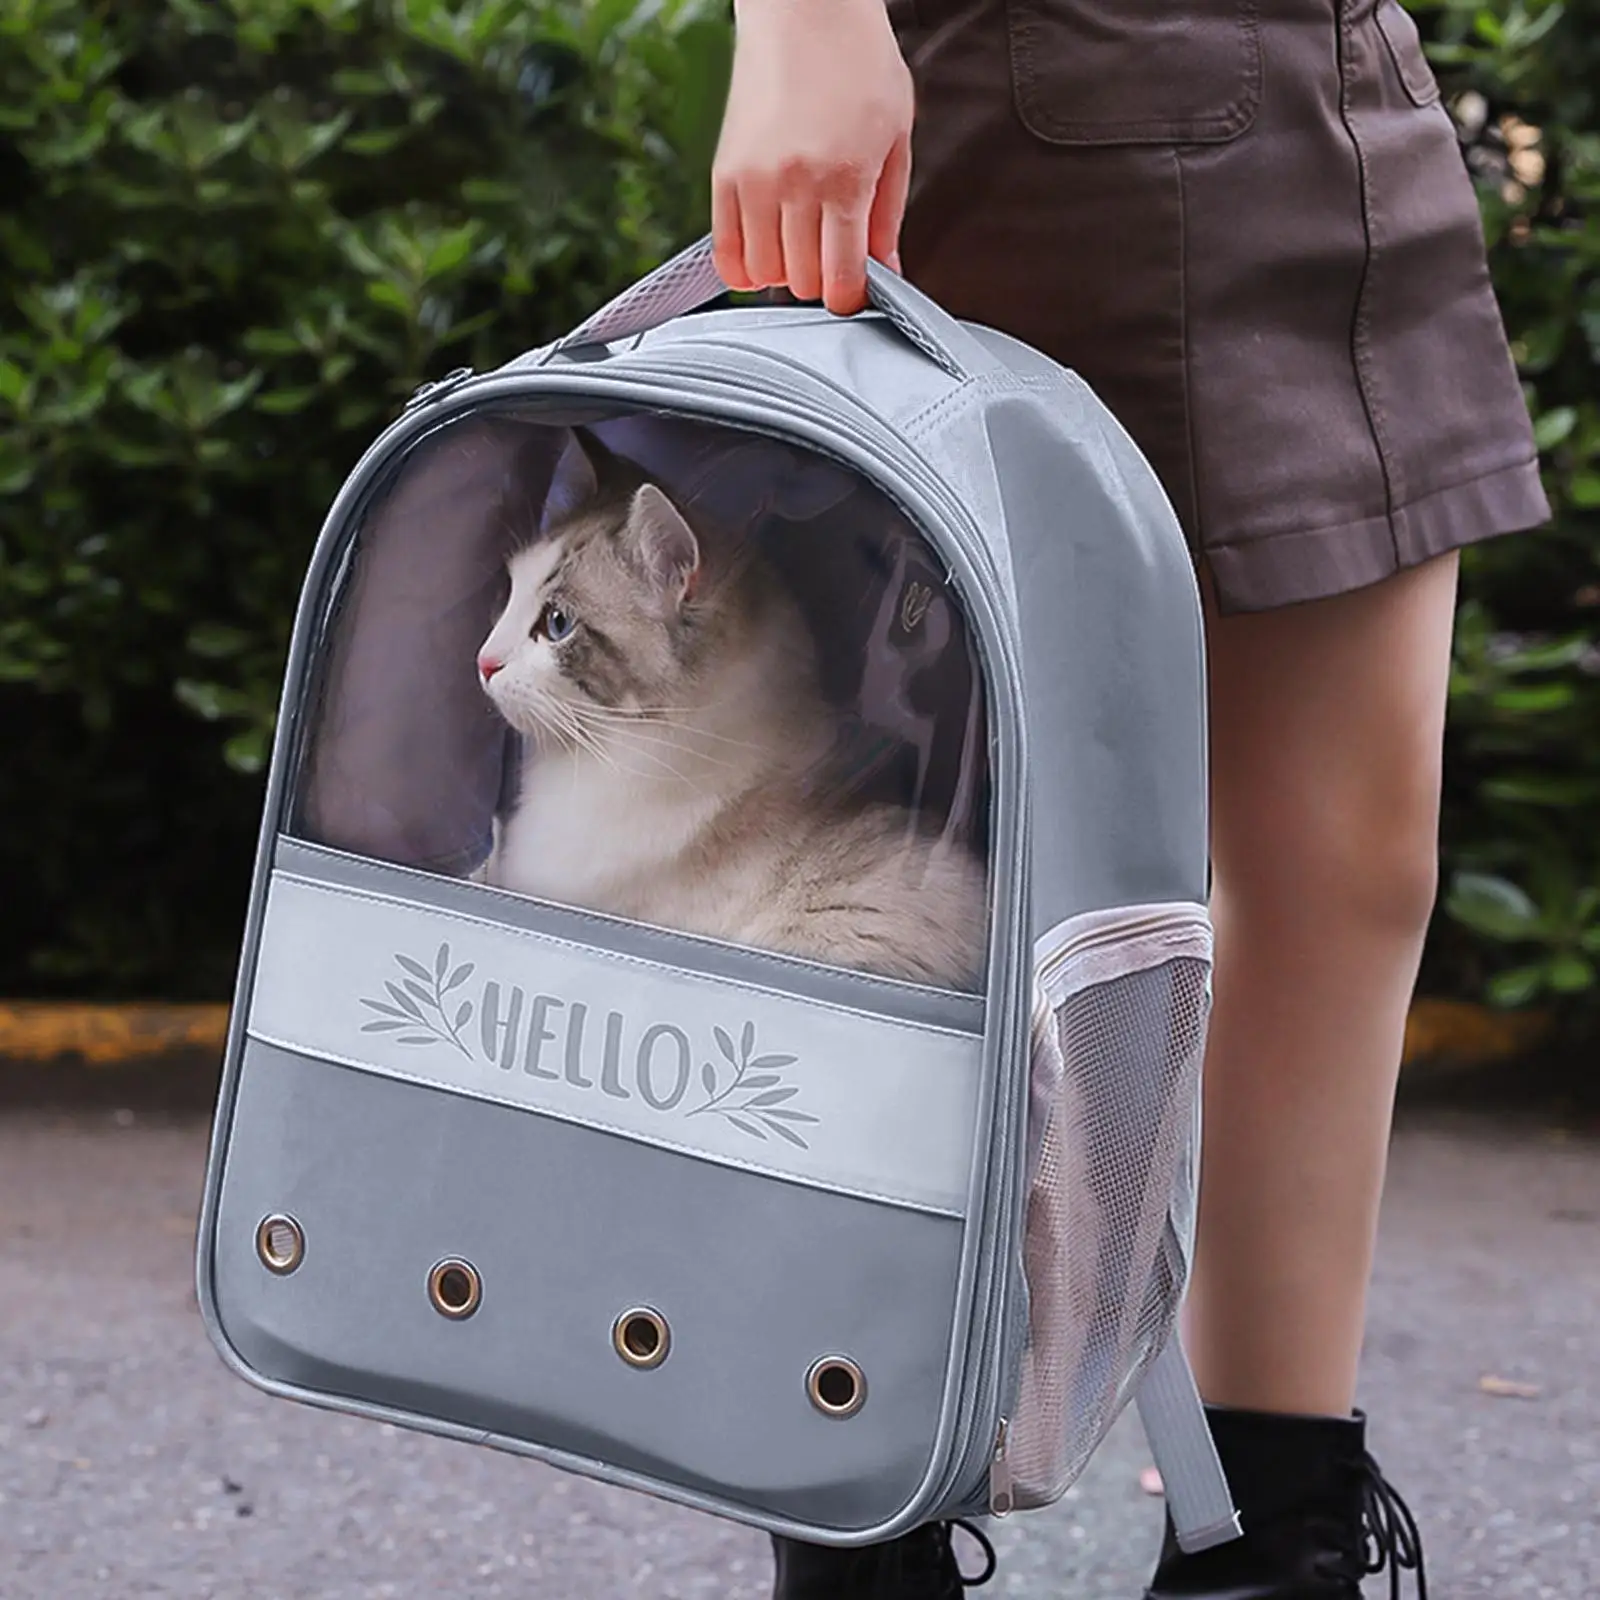  Carrier Backpack dog Travel Bag Front Breathable Carrying for Kitty Hiking up to 17.6lbs Cycling Walking